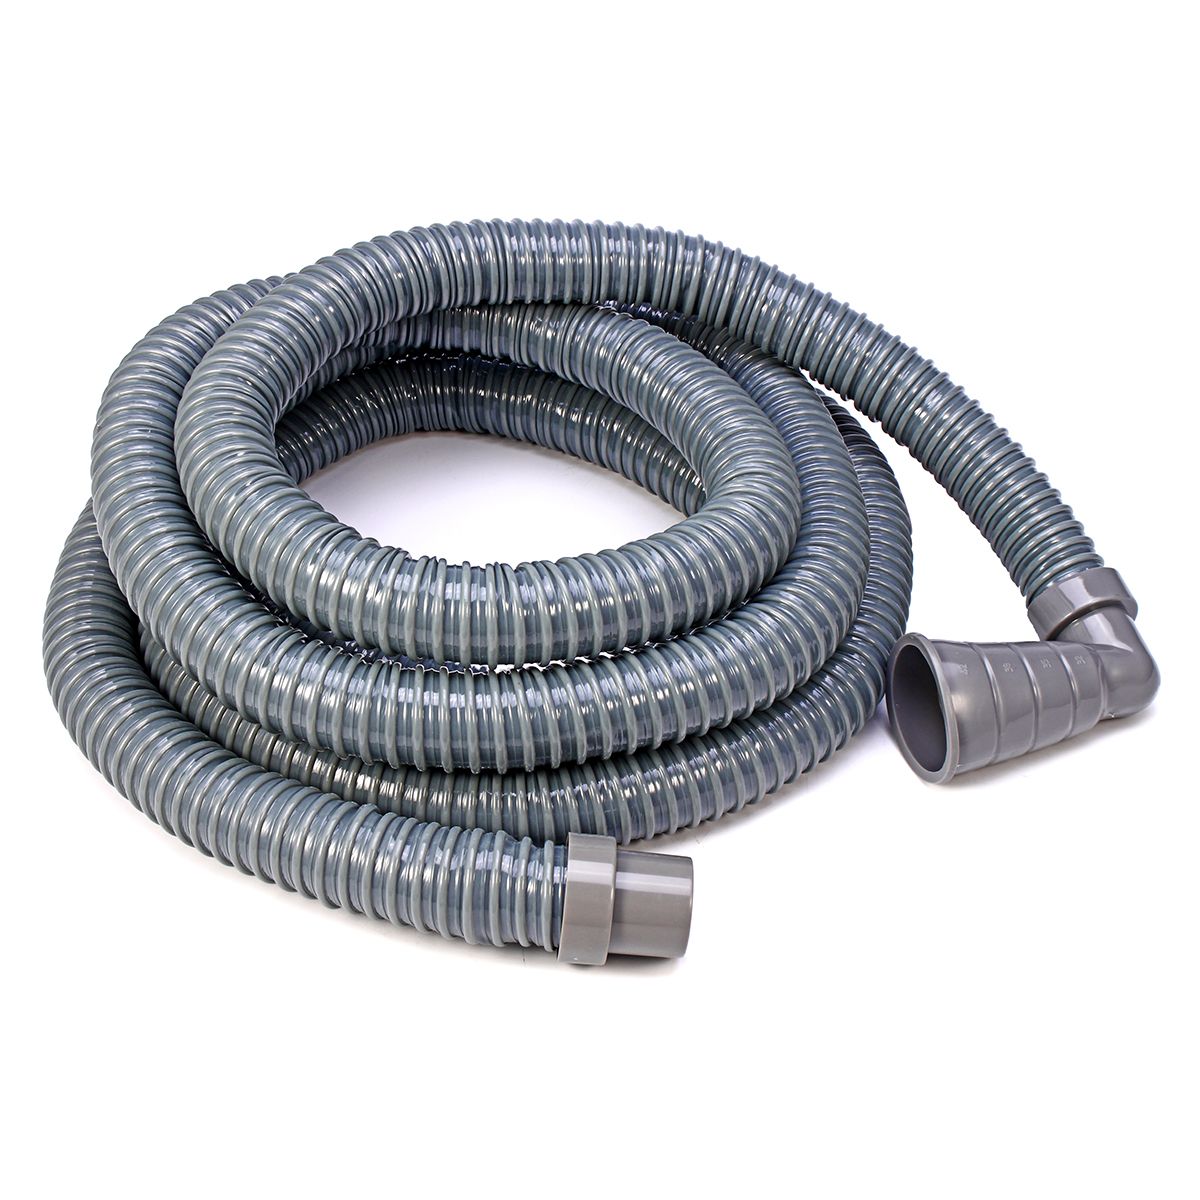 2345M-Universal-Extension-Washing-Machine-Drain-Water-Hose-Pipe-Connectors-1320398